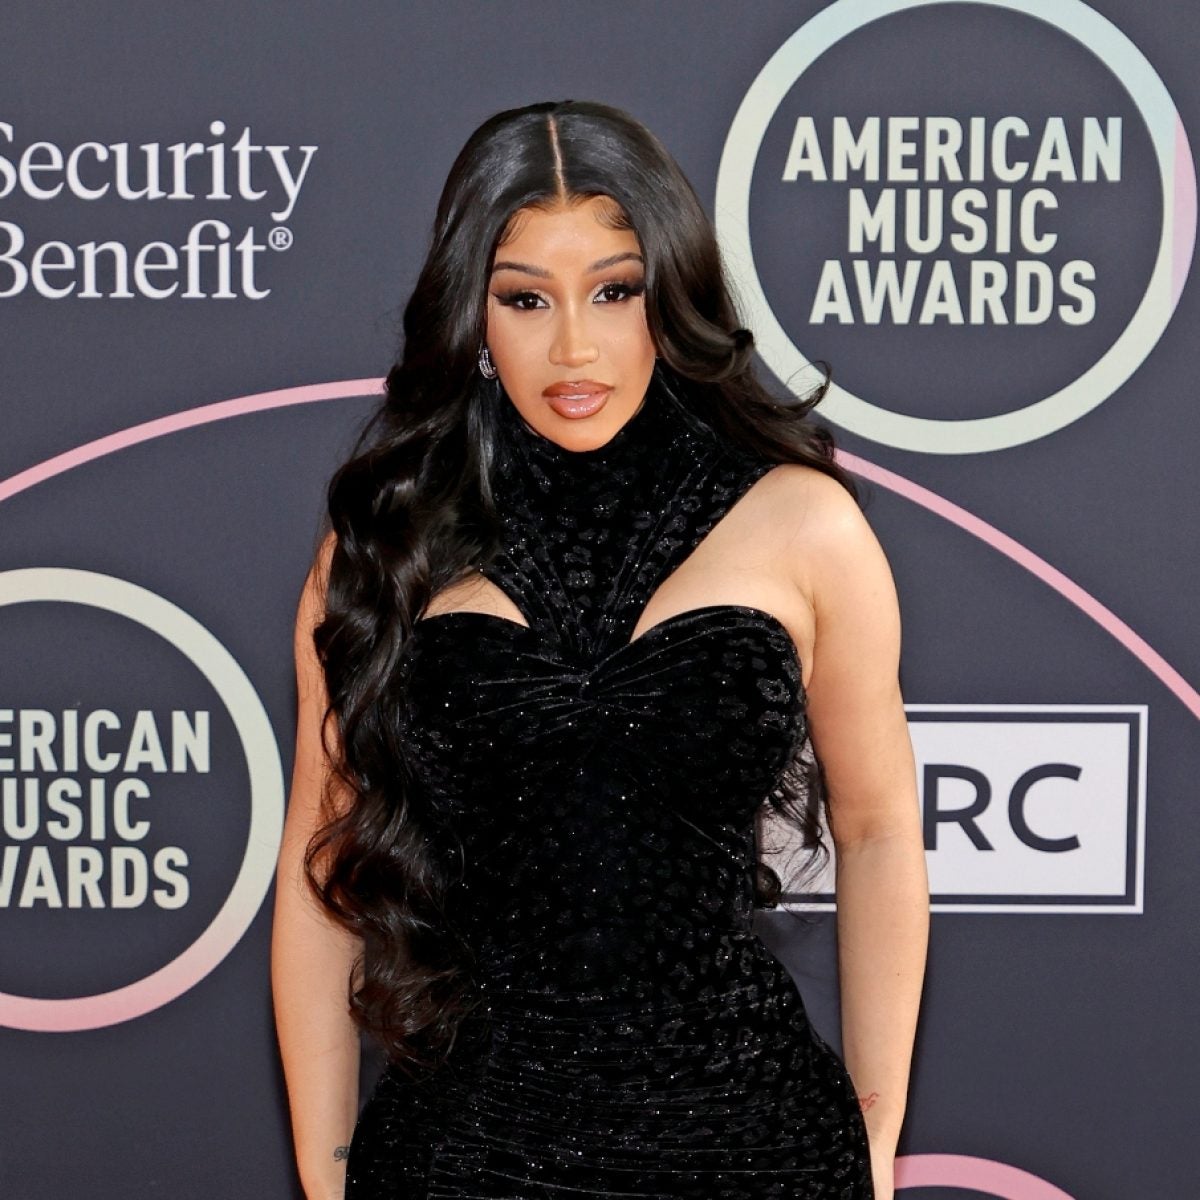 Cardi B On Hosting The American Music Awards Tonight: 'I'm Getting Too Nervous'